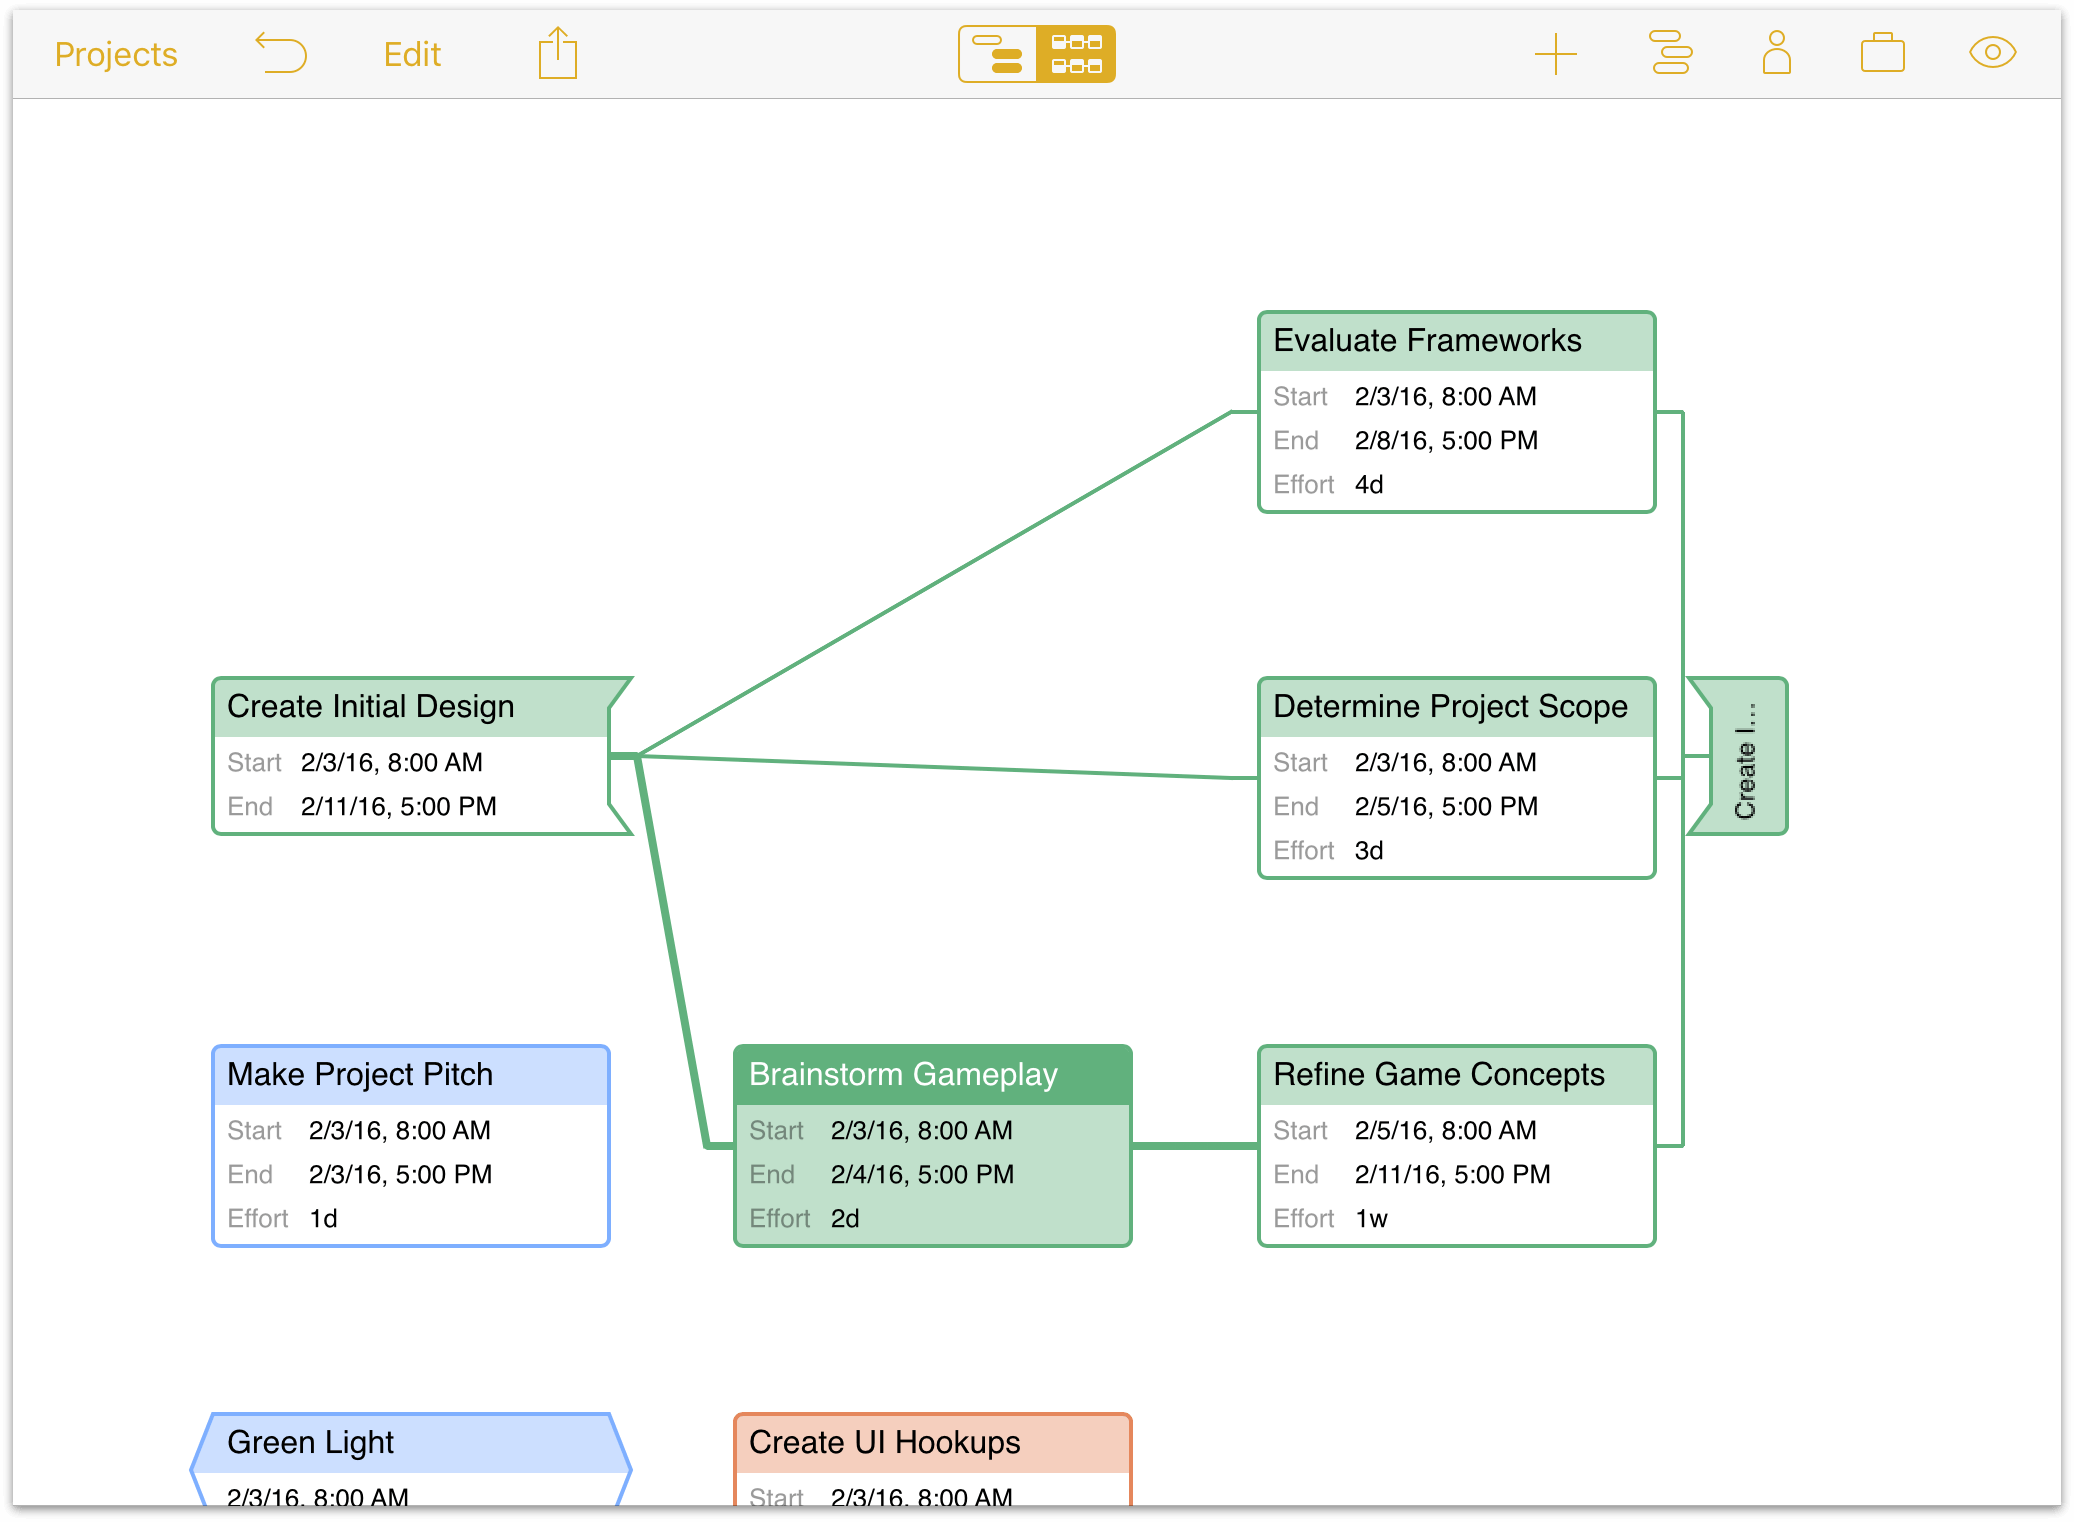 The work-in-progress project as it currently exists in Network View.